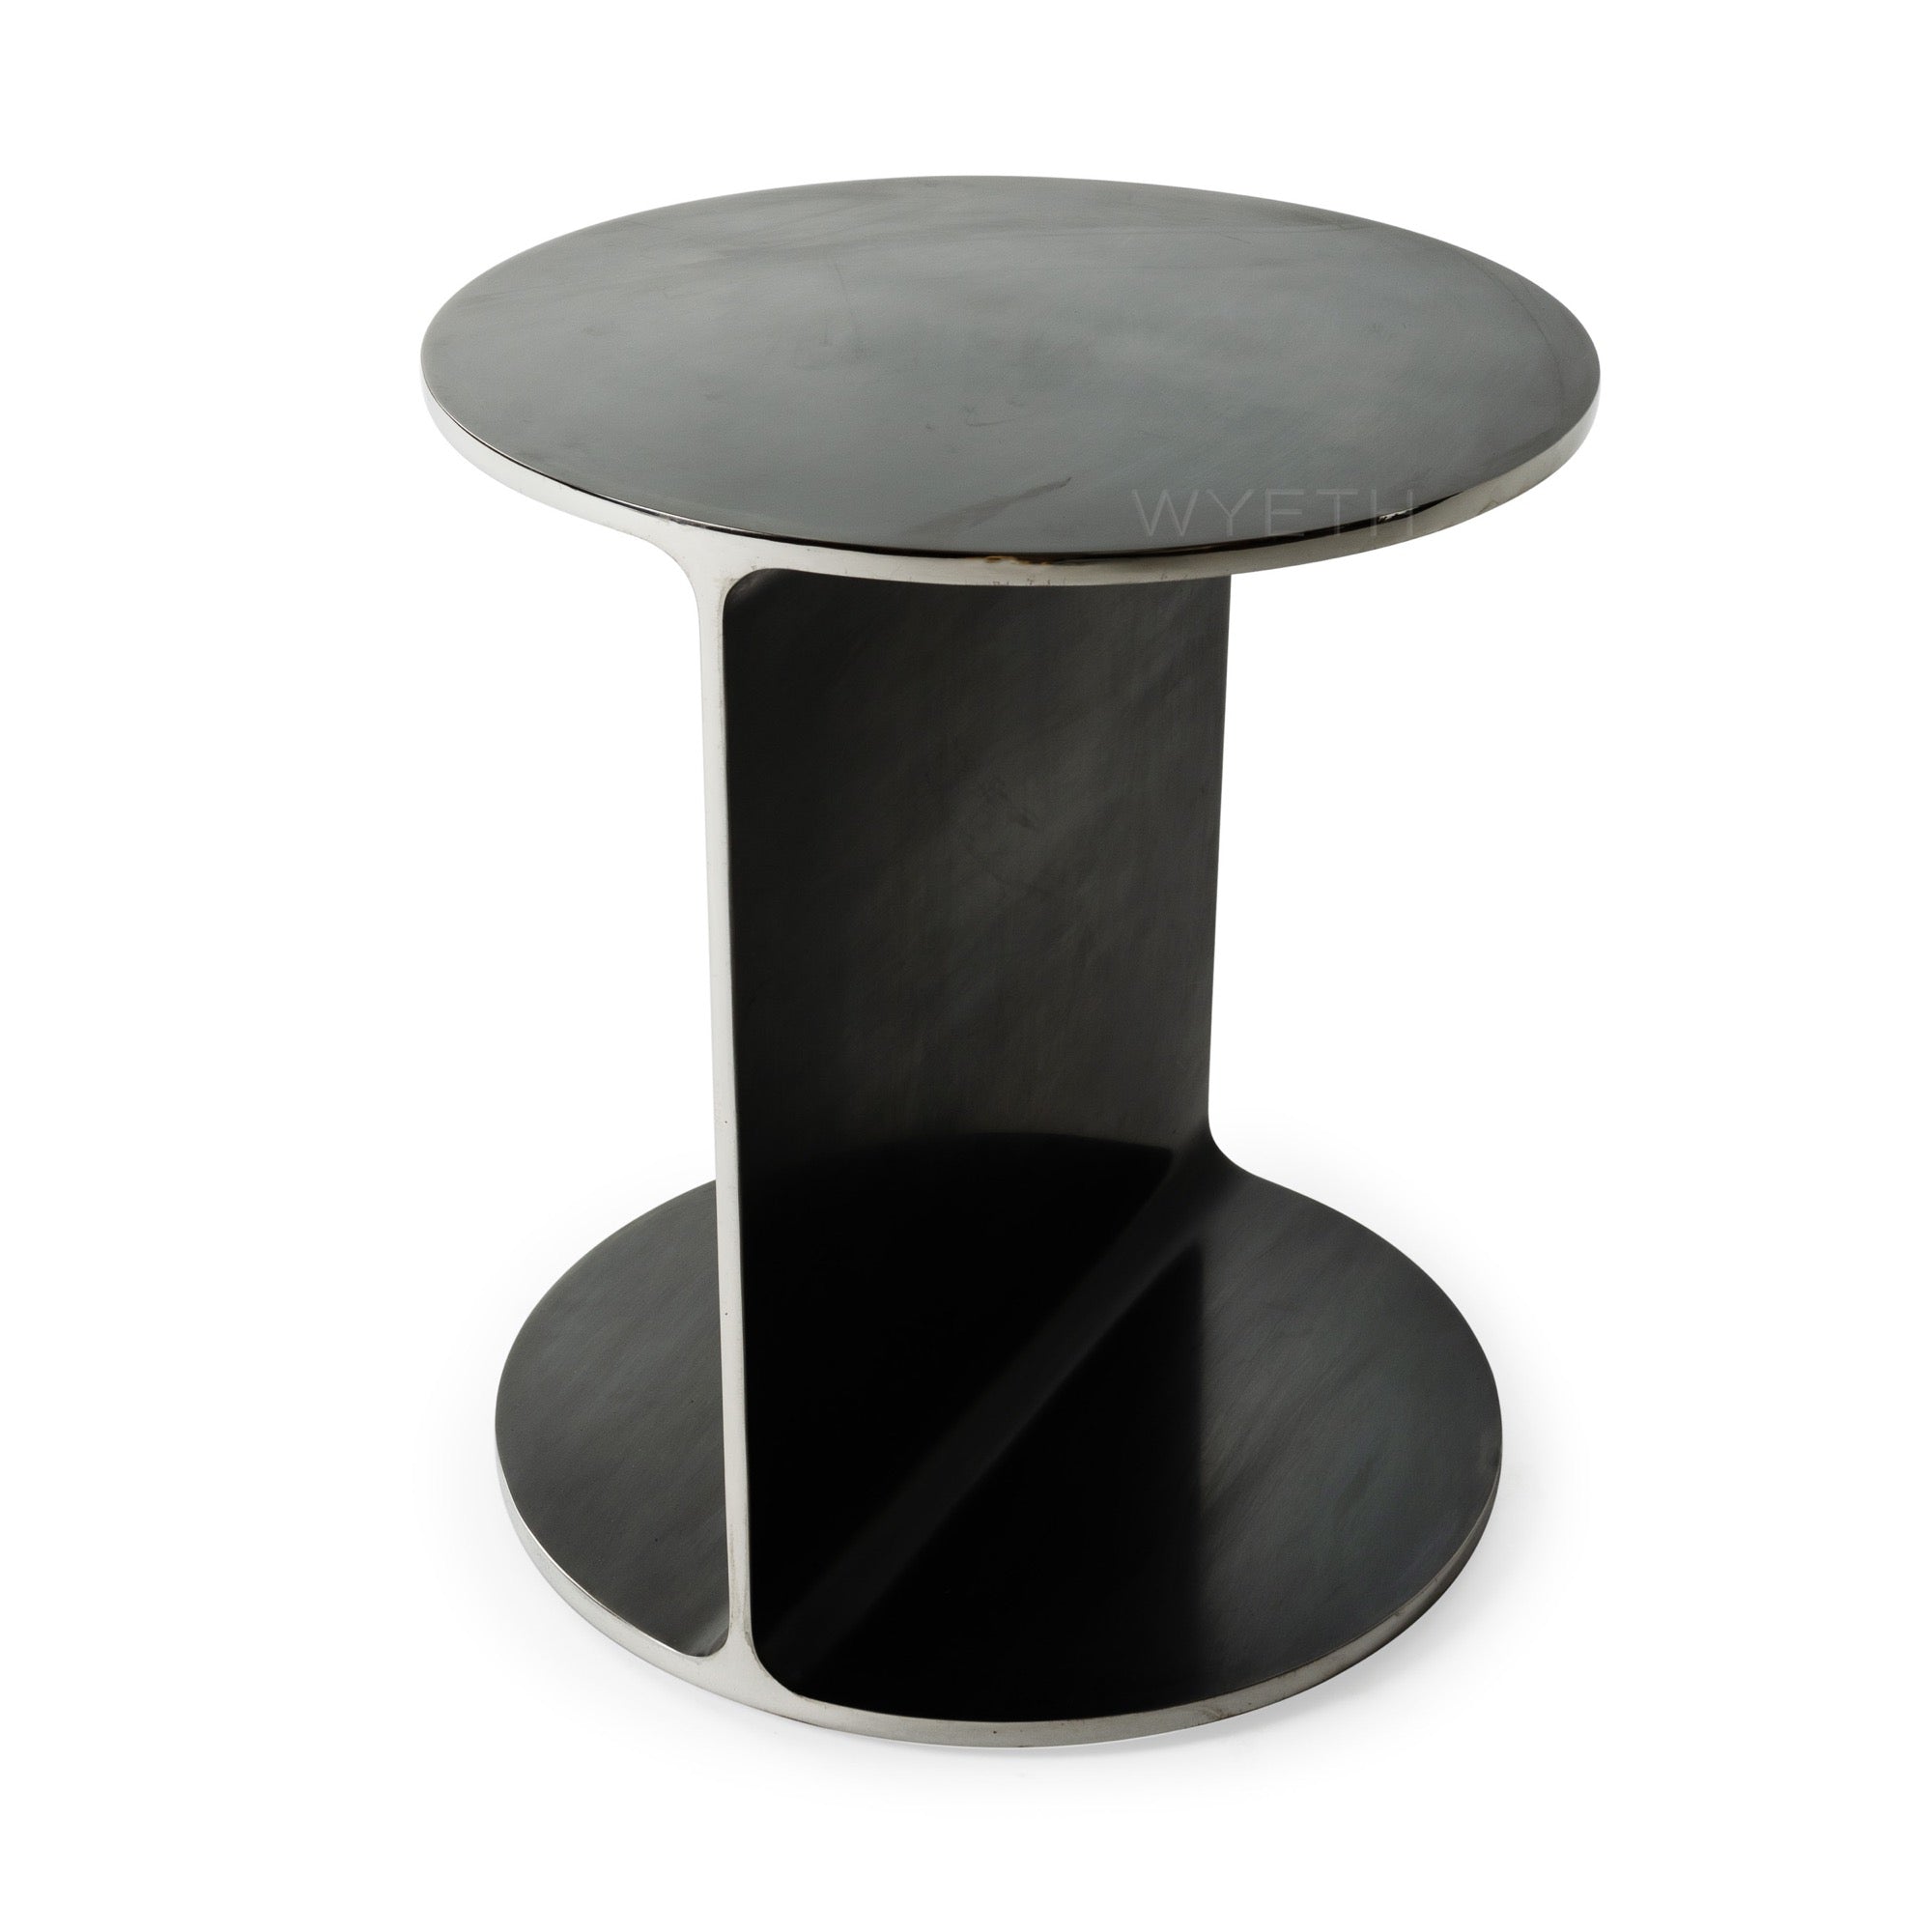 ‘Round I-Beam’ Side Table in Blackened Stainless Steel with Polished Edges by WYETH, Made to Order